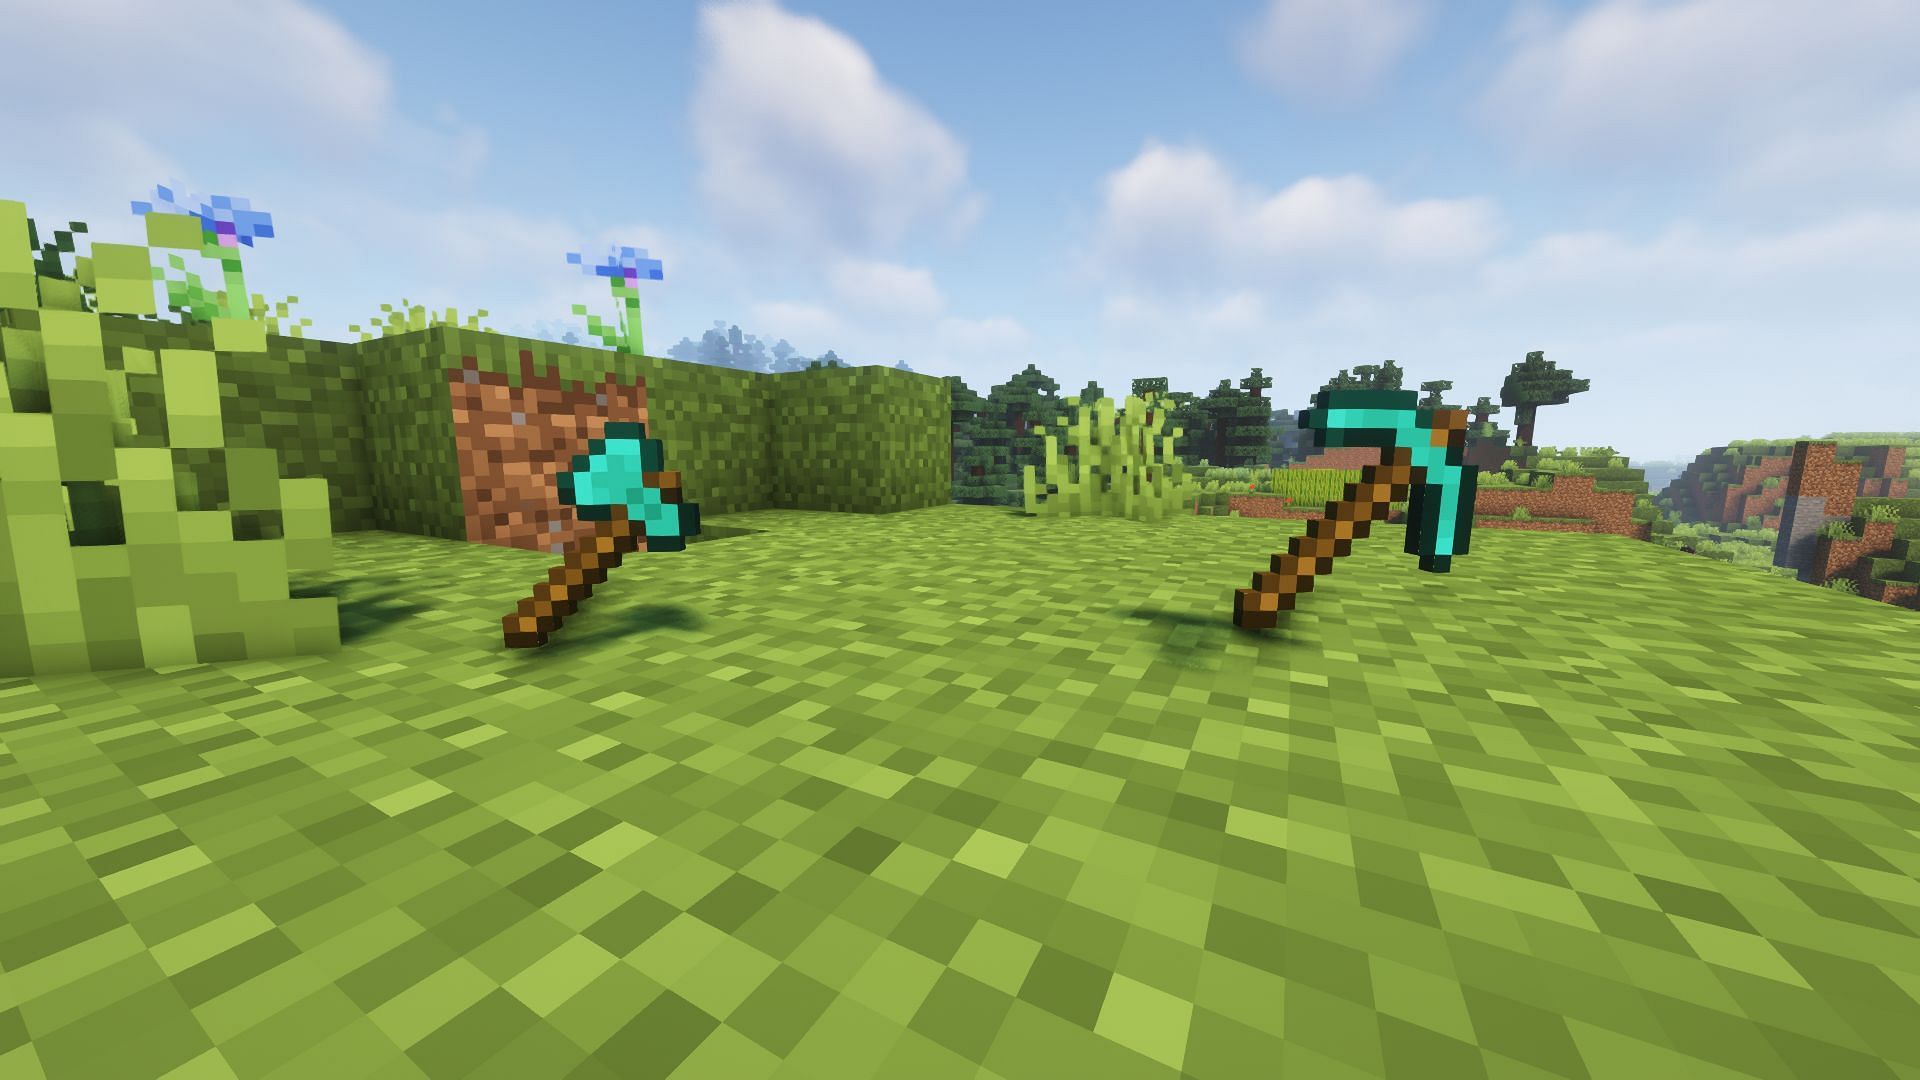 An axe and a pickaxe in the game (Image via Minecraft)